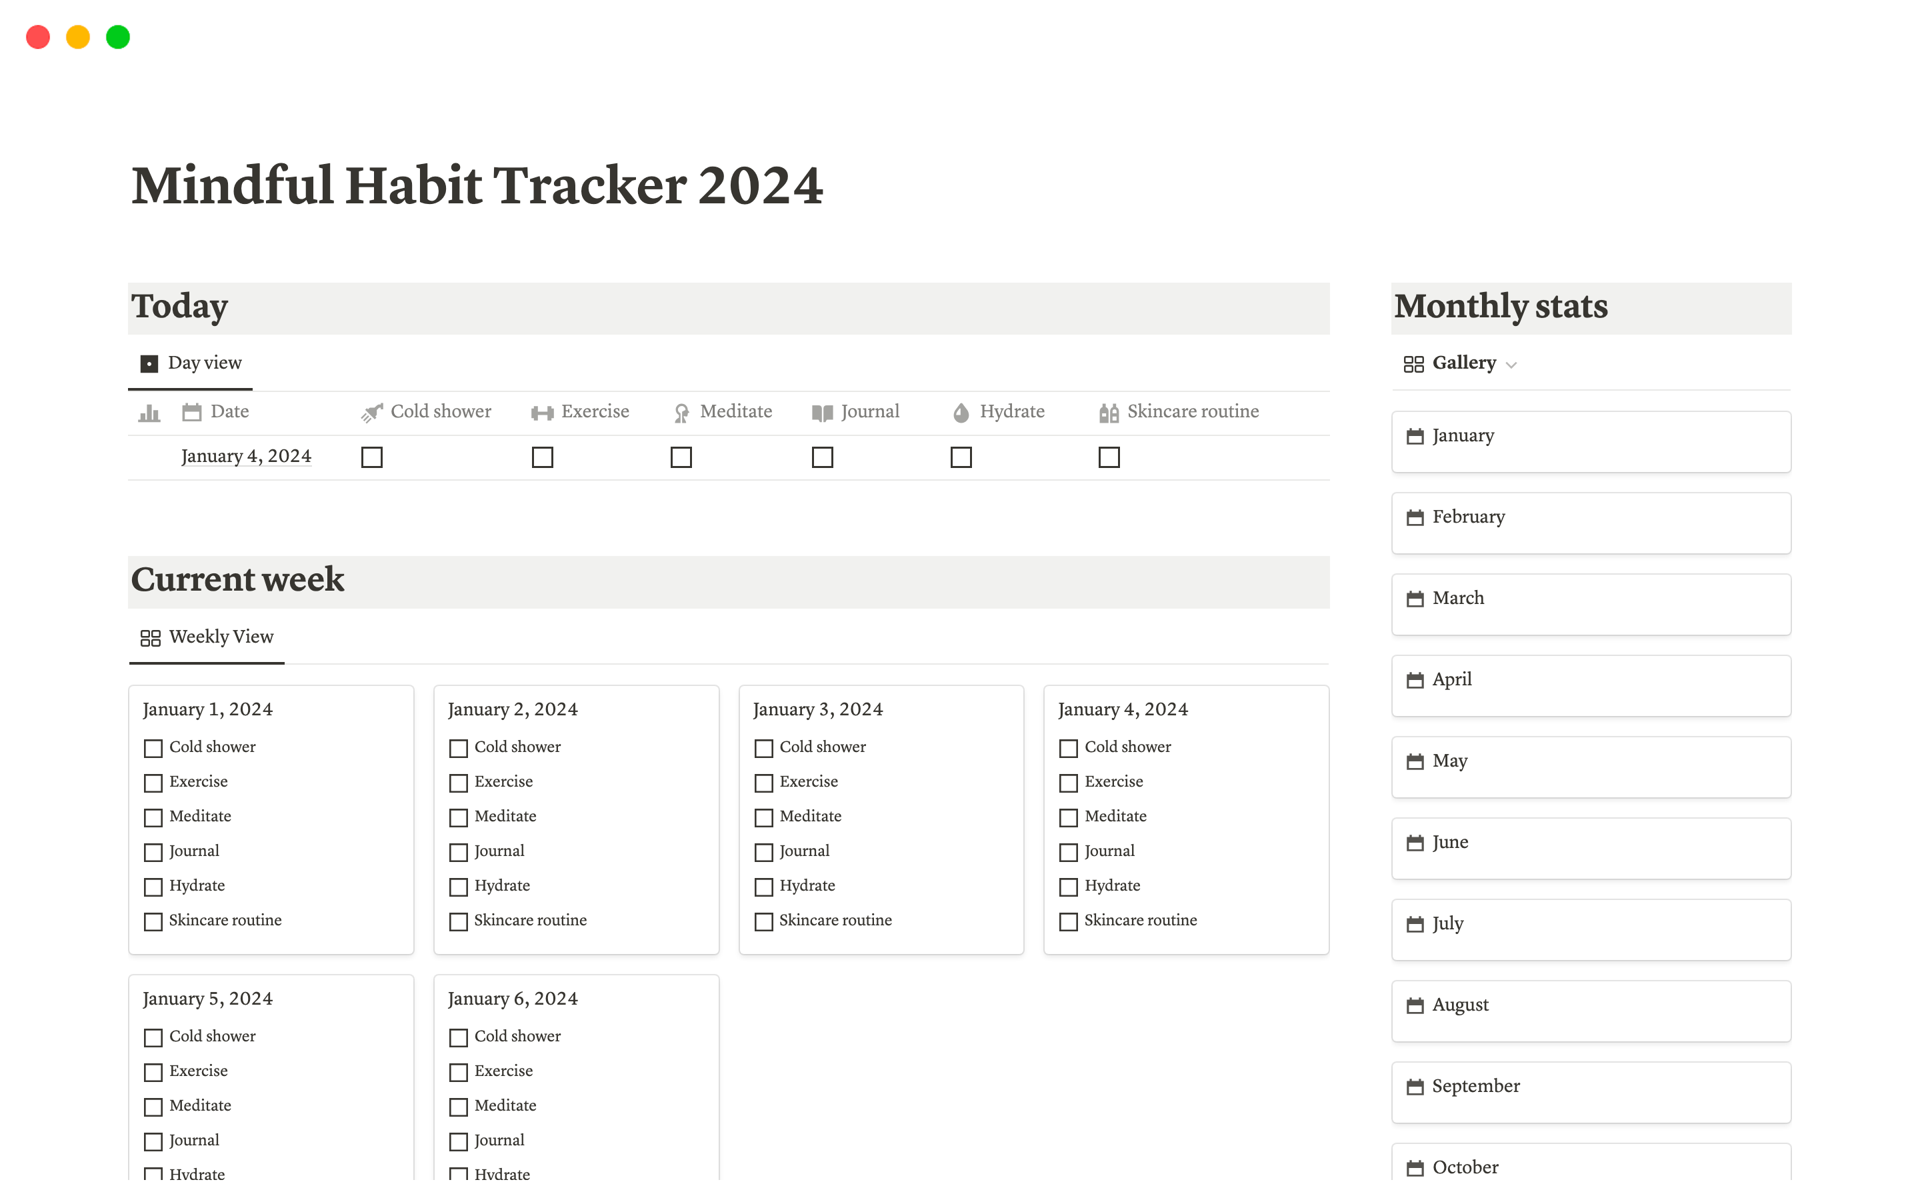 Step into the new year with intention with our new 2024 Mindful Habit Tracker!